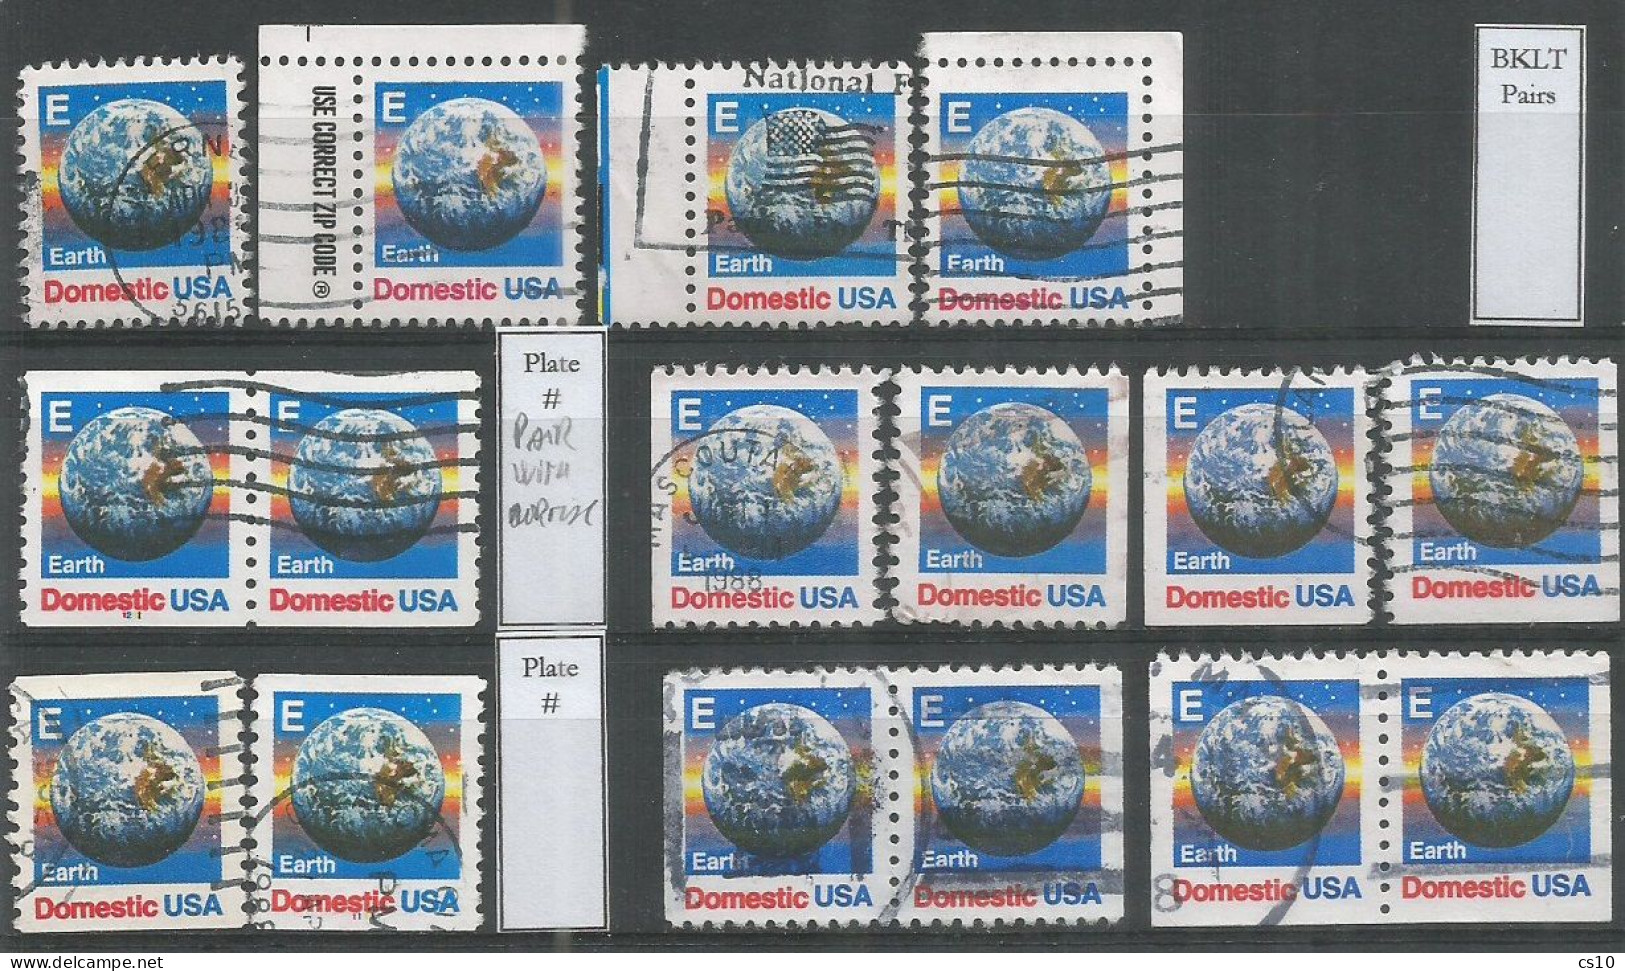 USA 1988 "E" Rate Stamp SC.#2277 +2279+2282 : Cpl Issue Sheet + Margin/corner - Coil + Plate # - Booklets With Pairs - Errors, Freaks & Oddities (EFOs)